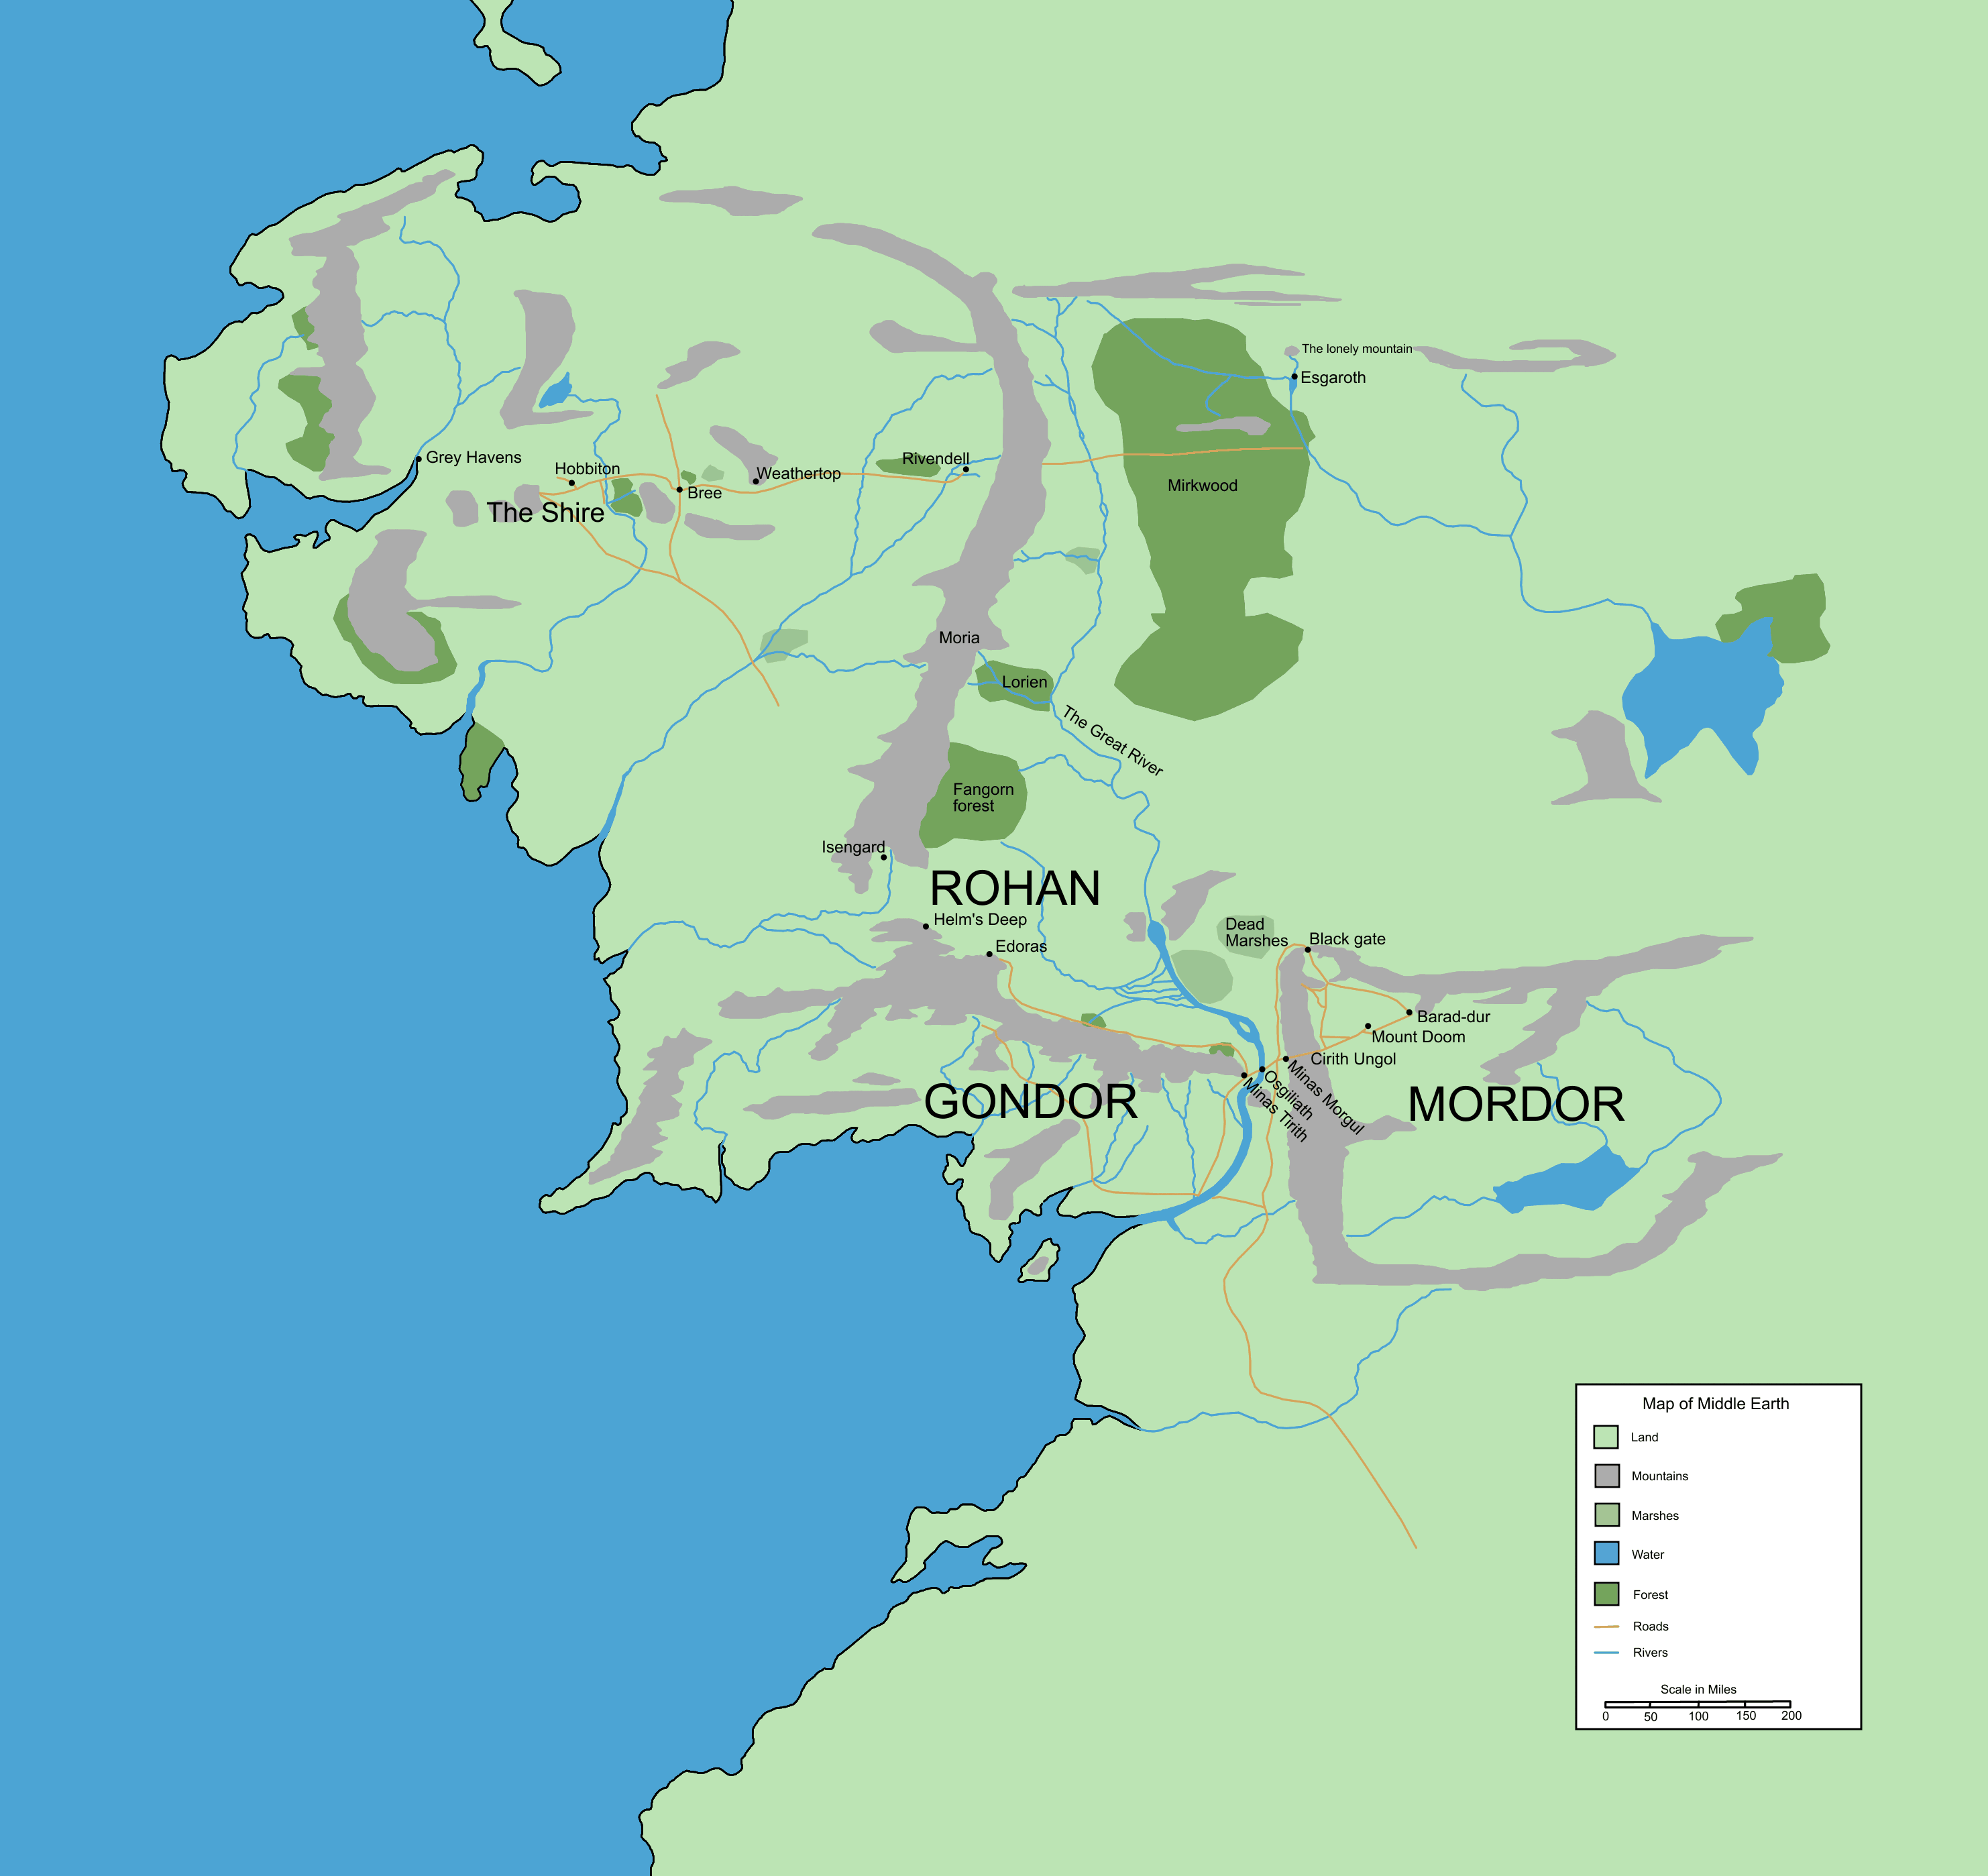 The Lord of the Rings - Wikipedia